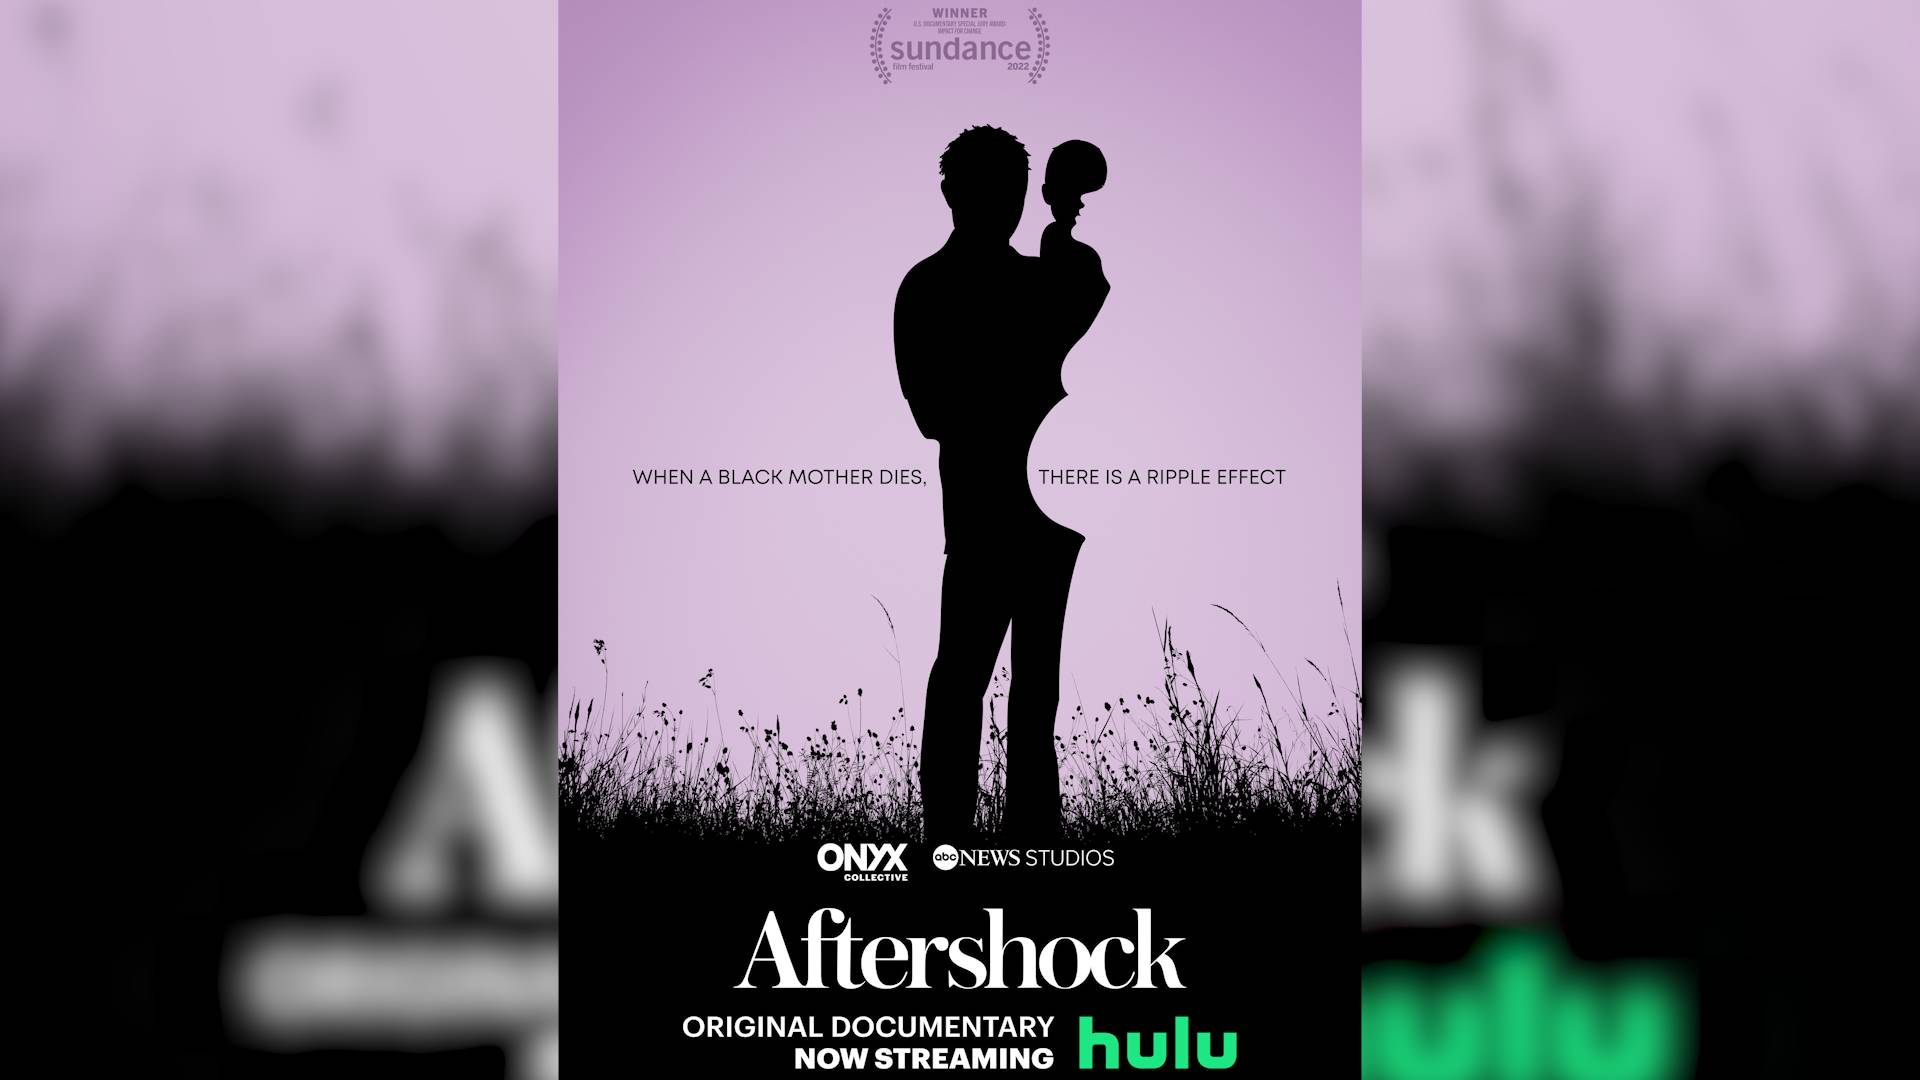 ‘Fallout’: A film that explores the unequal maternal mortality rate for black women in the United States and its potential exacerbation after the abolition of the right to abortion.